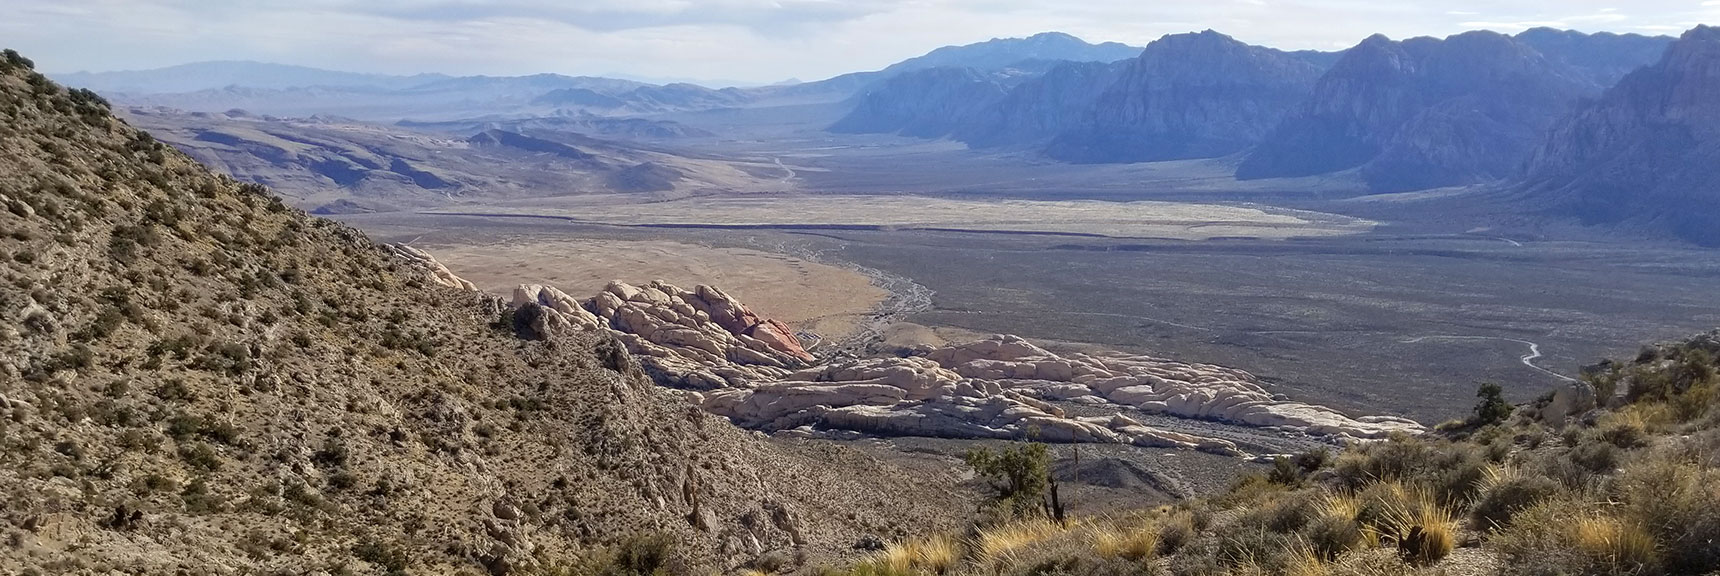 Red Rock Canyon from Turtlehead Peak Saddle in Red Rock Park, Nevada